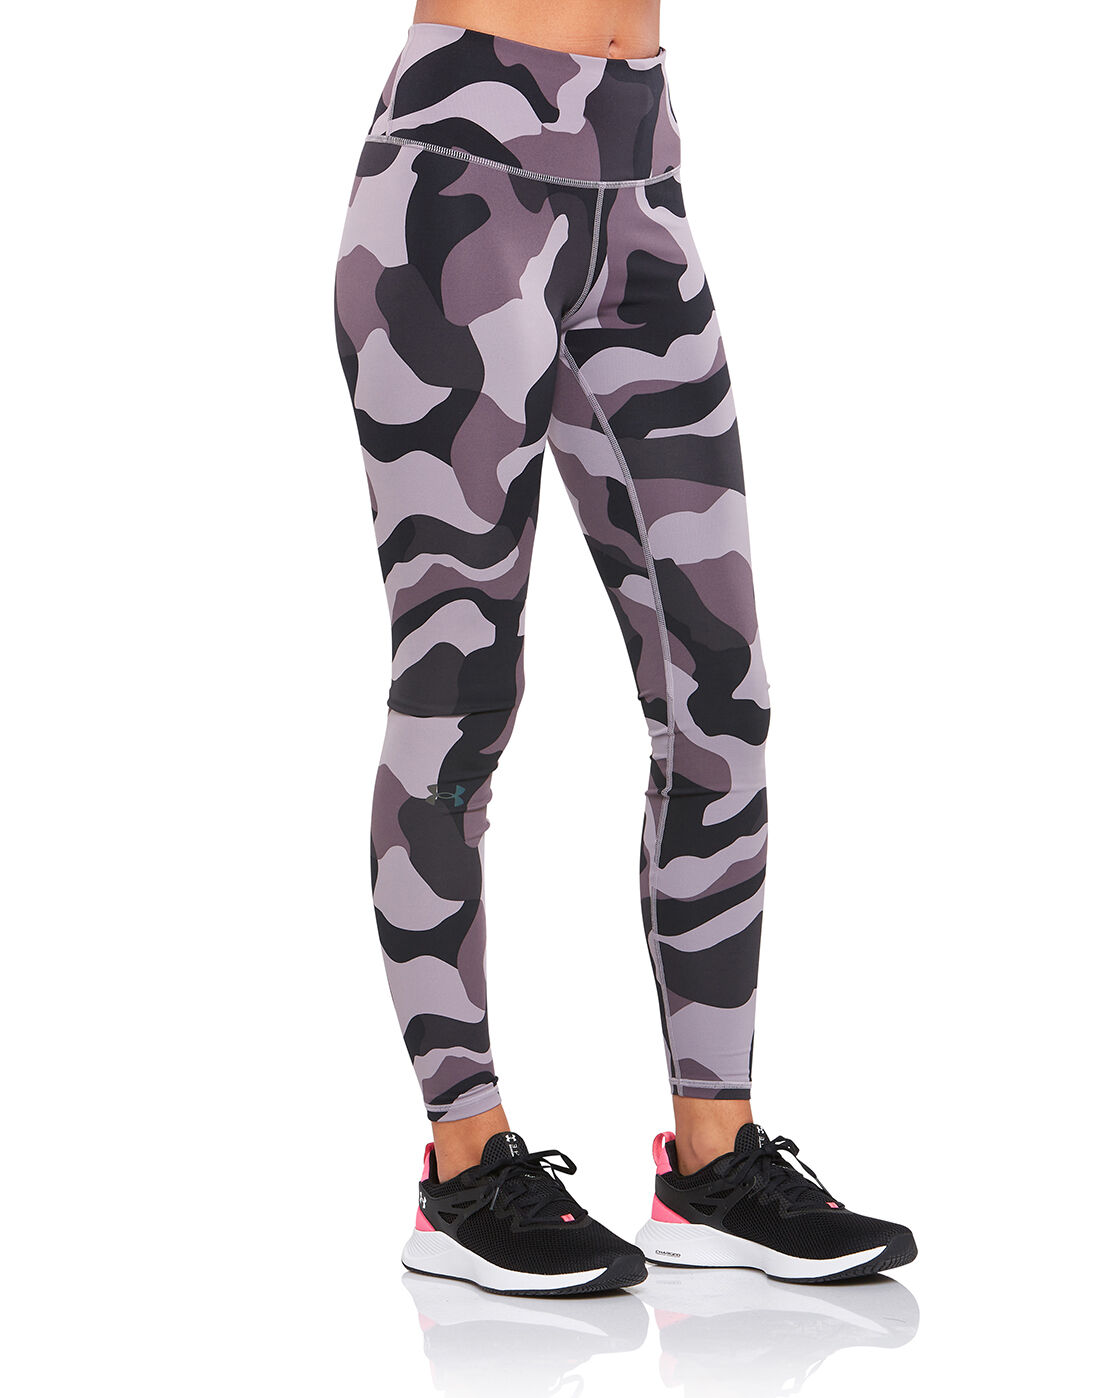 Cultsport Absolute Fit Women Camo Leggings Buy Cultsport Absolute Fit  Women Camo Leggings Online at Best Price in India  Nykaa